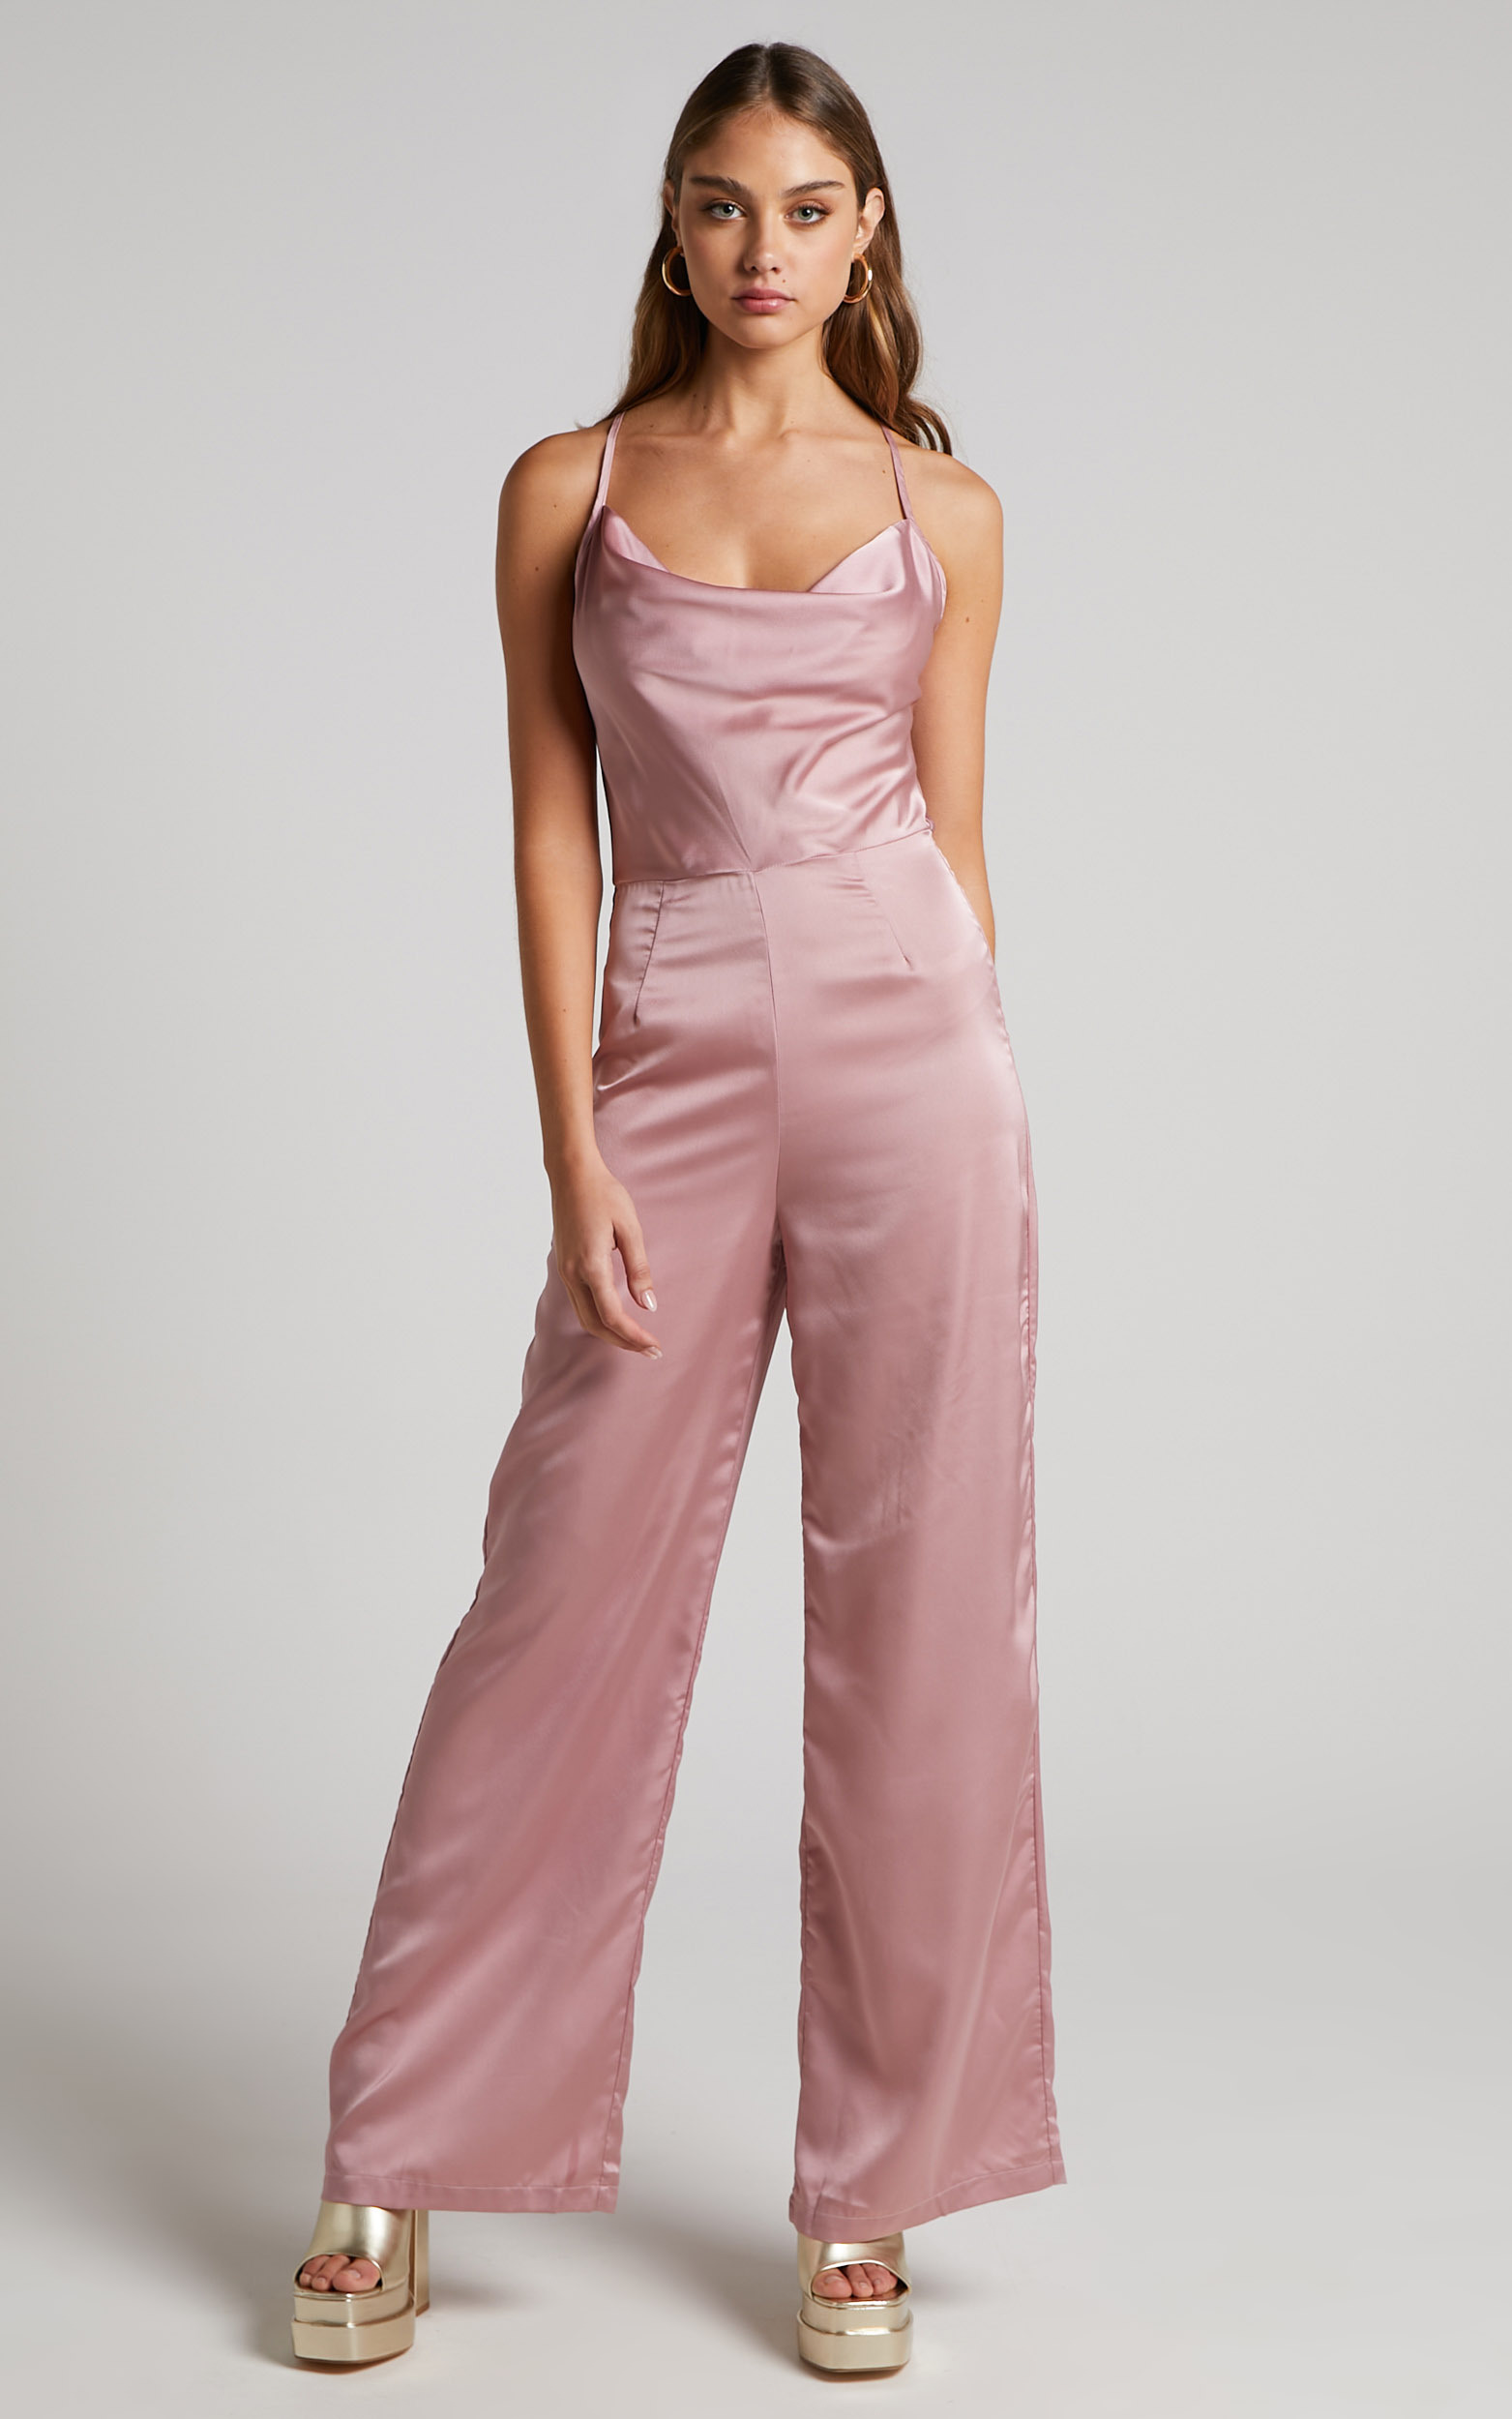 Kylene Cowl Neck Palazzo Satin Jumpsuit in Pale Pink - 06, PNK1, hi-res image number null